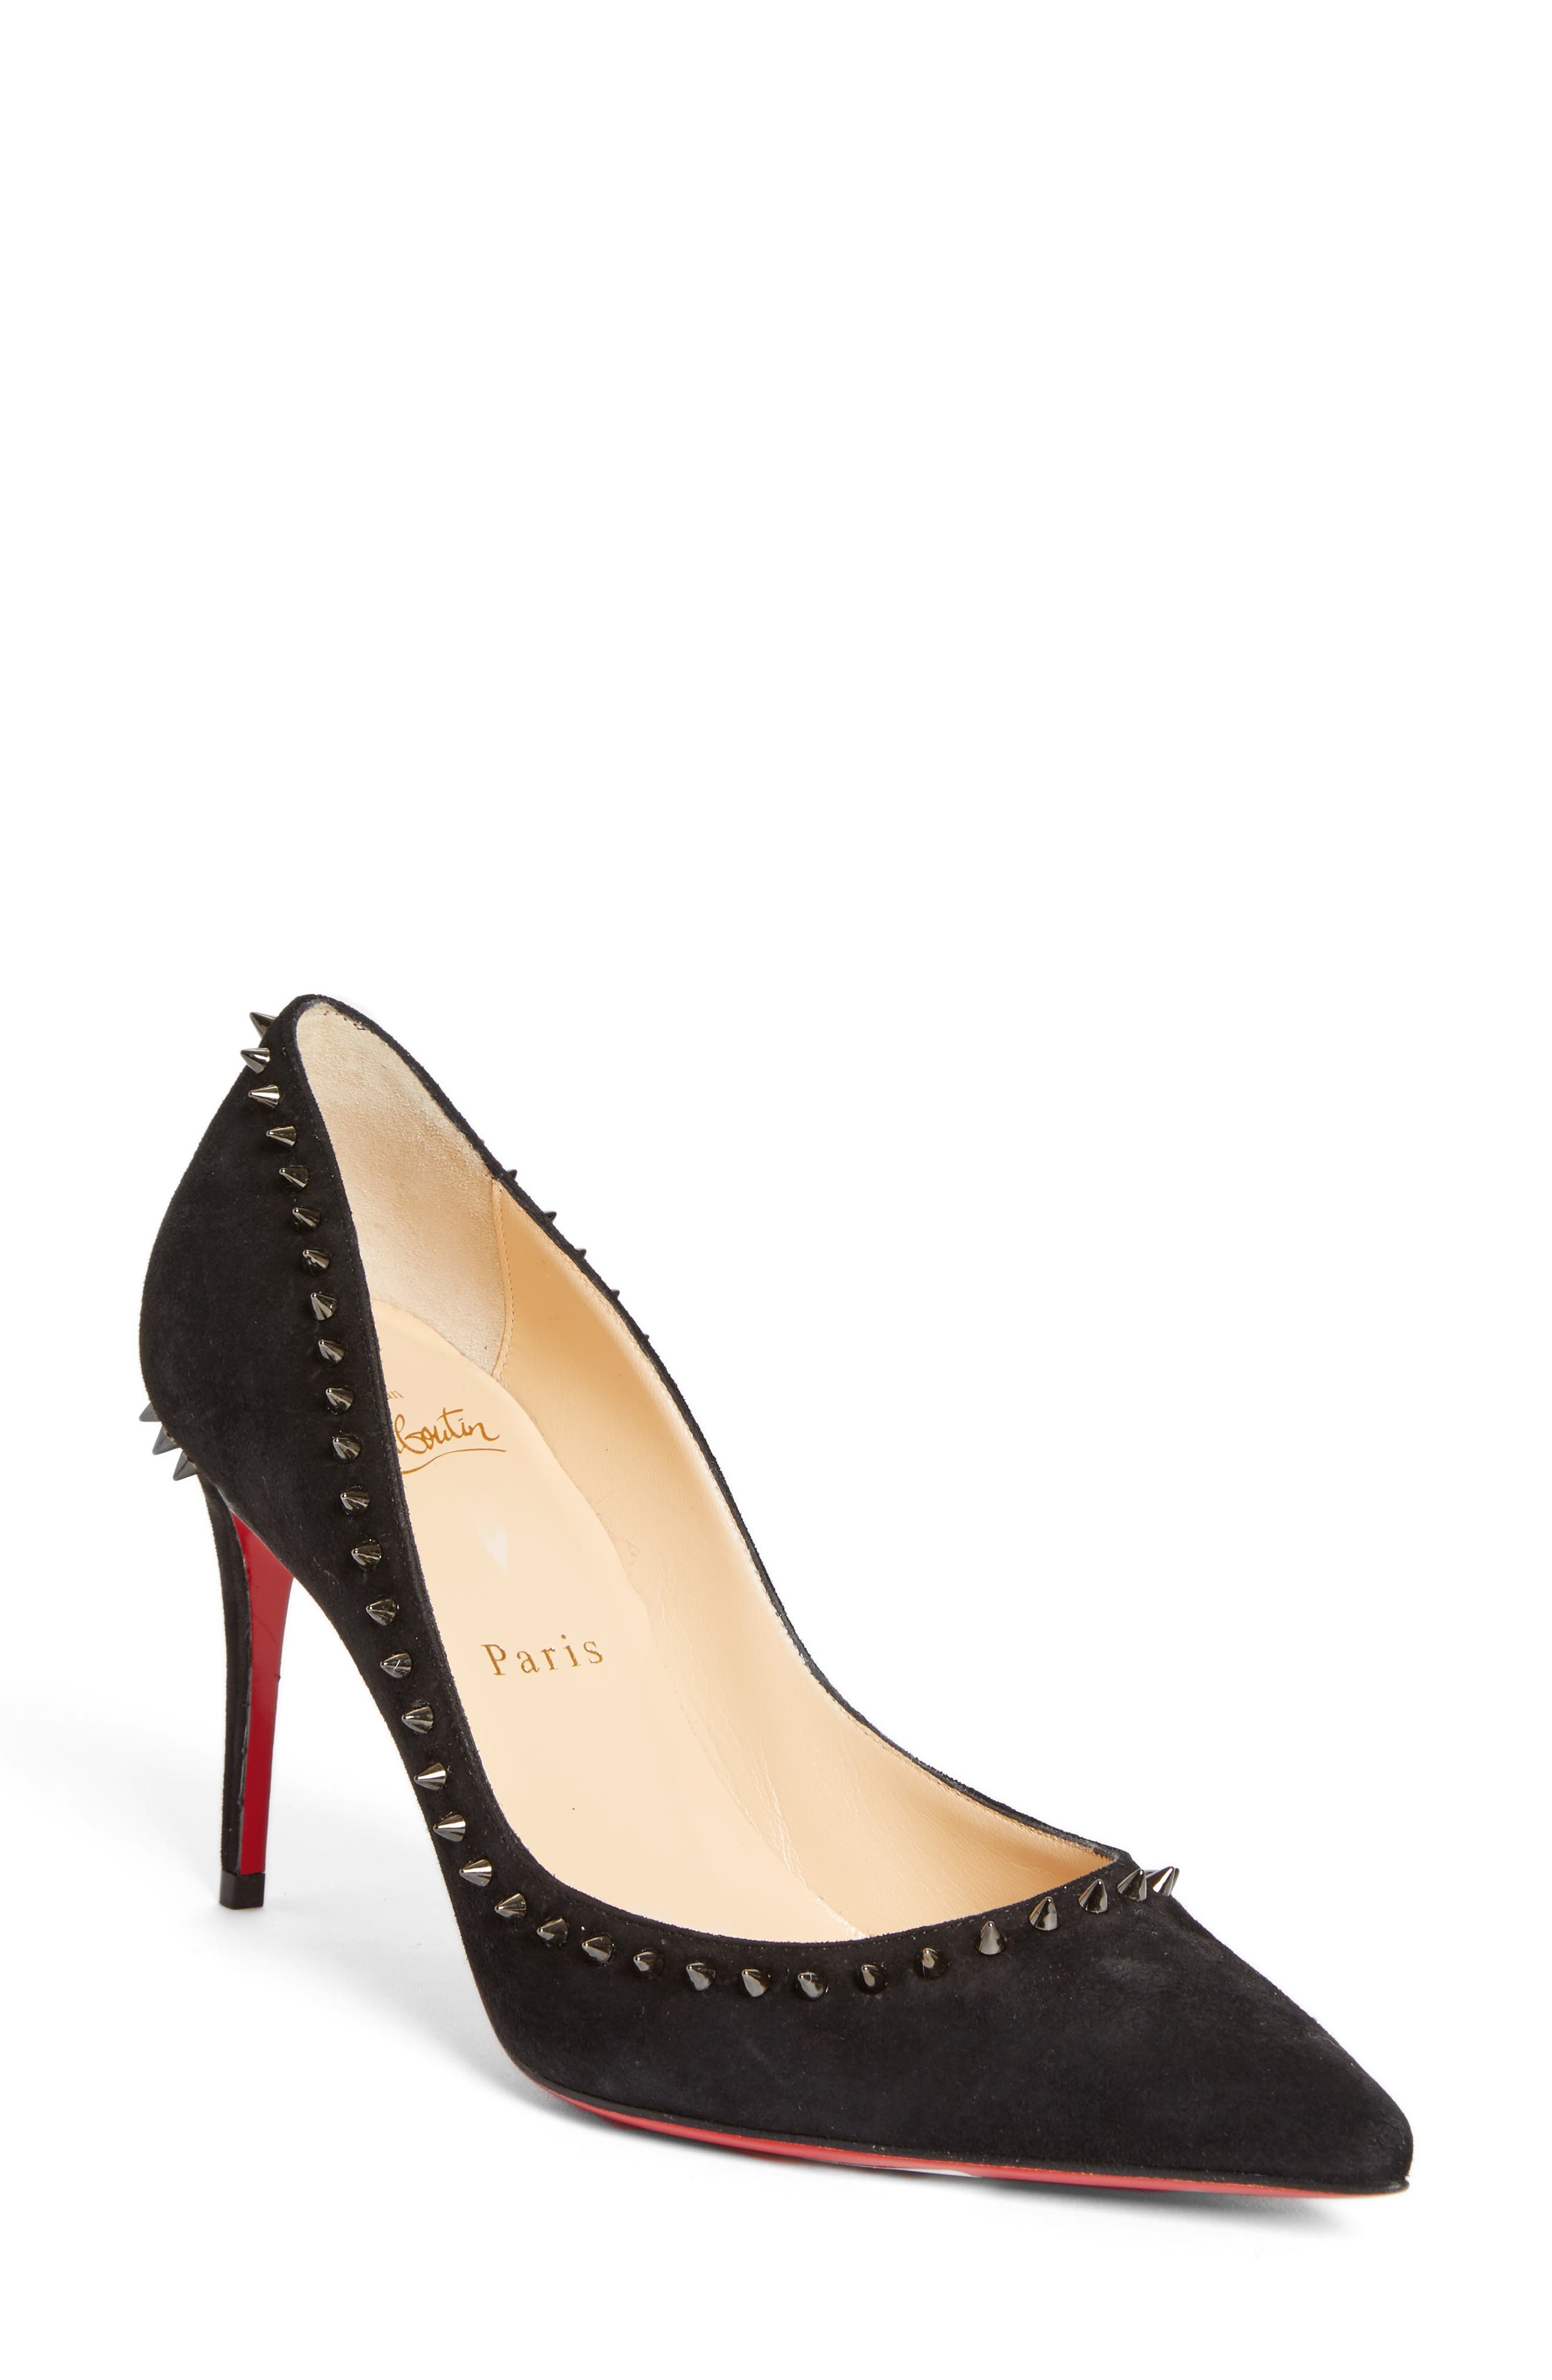 christian louboutin shoes nordstrom rack